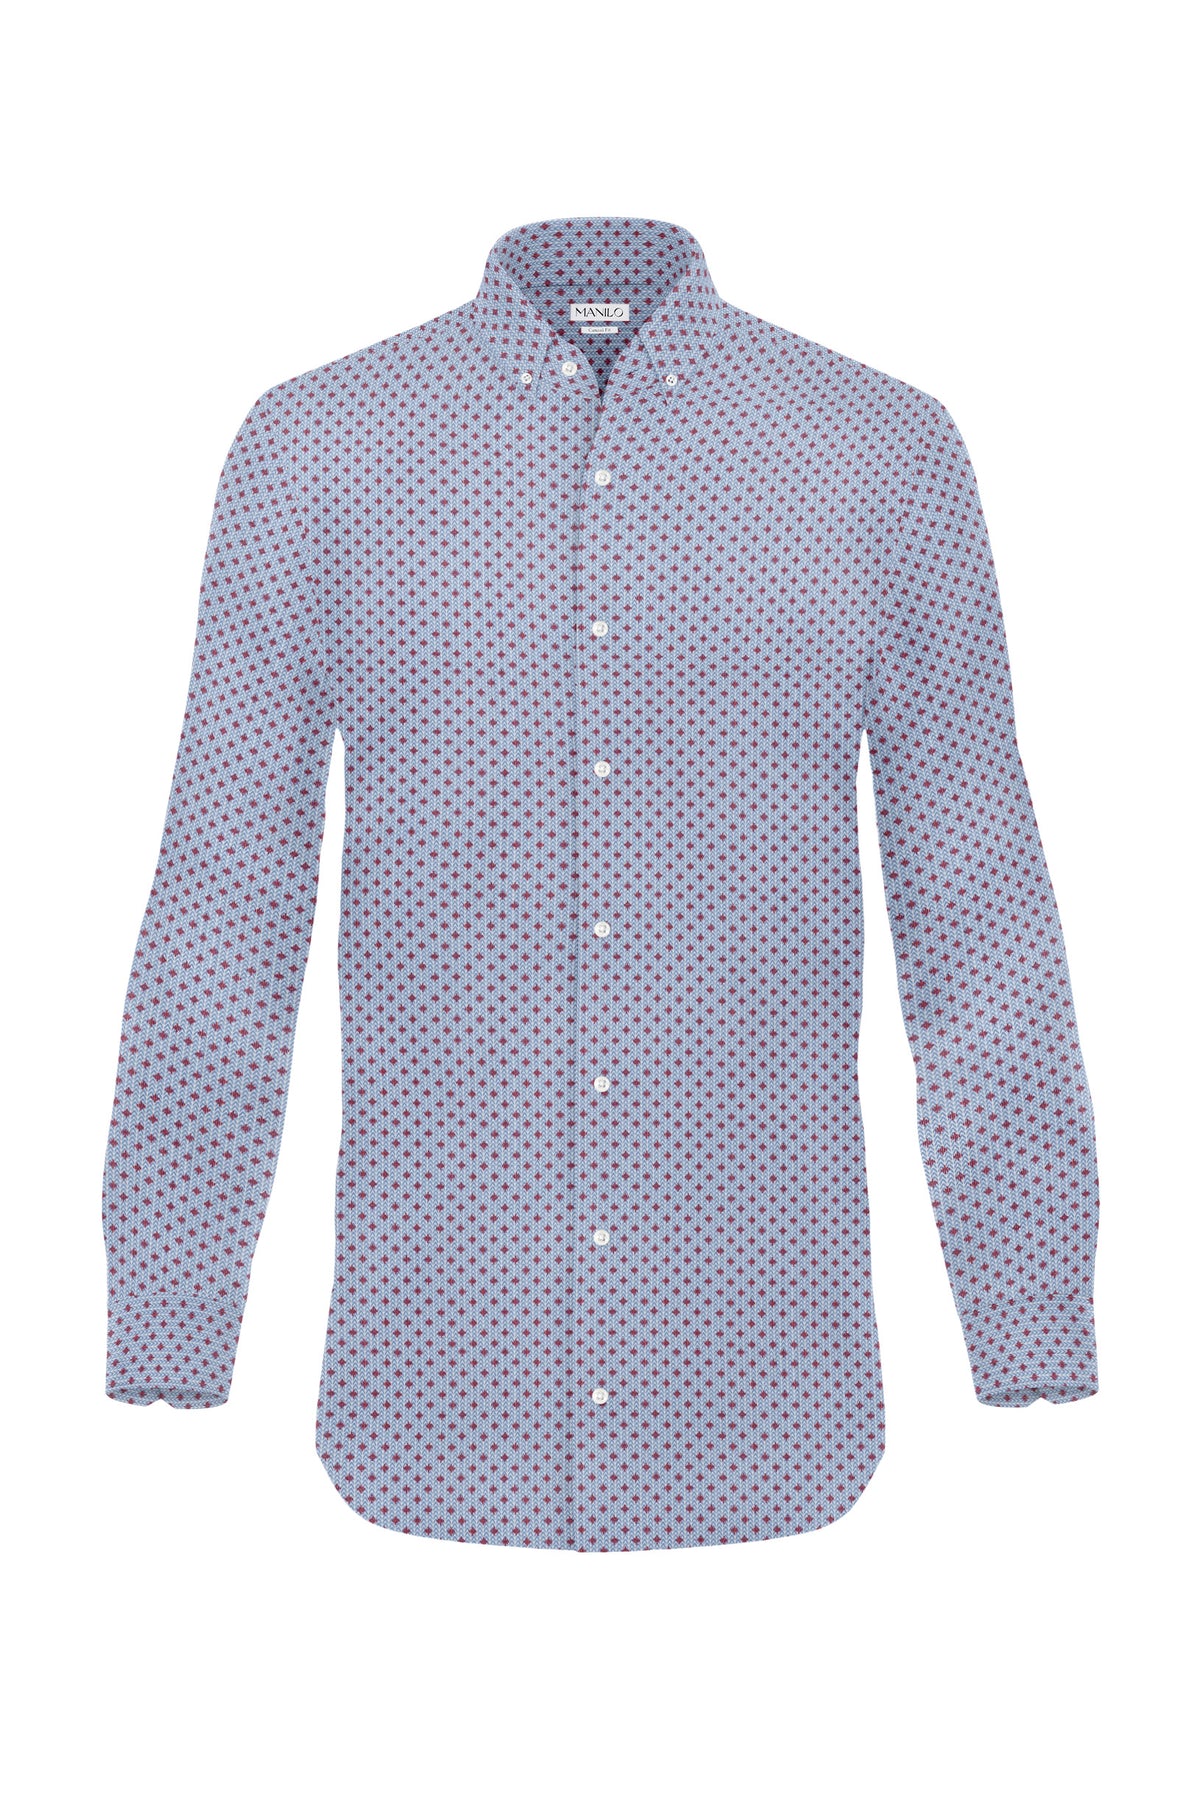 Printed casual shirt with graphic pattern in light blue/red (Art. 2118-C)